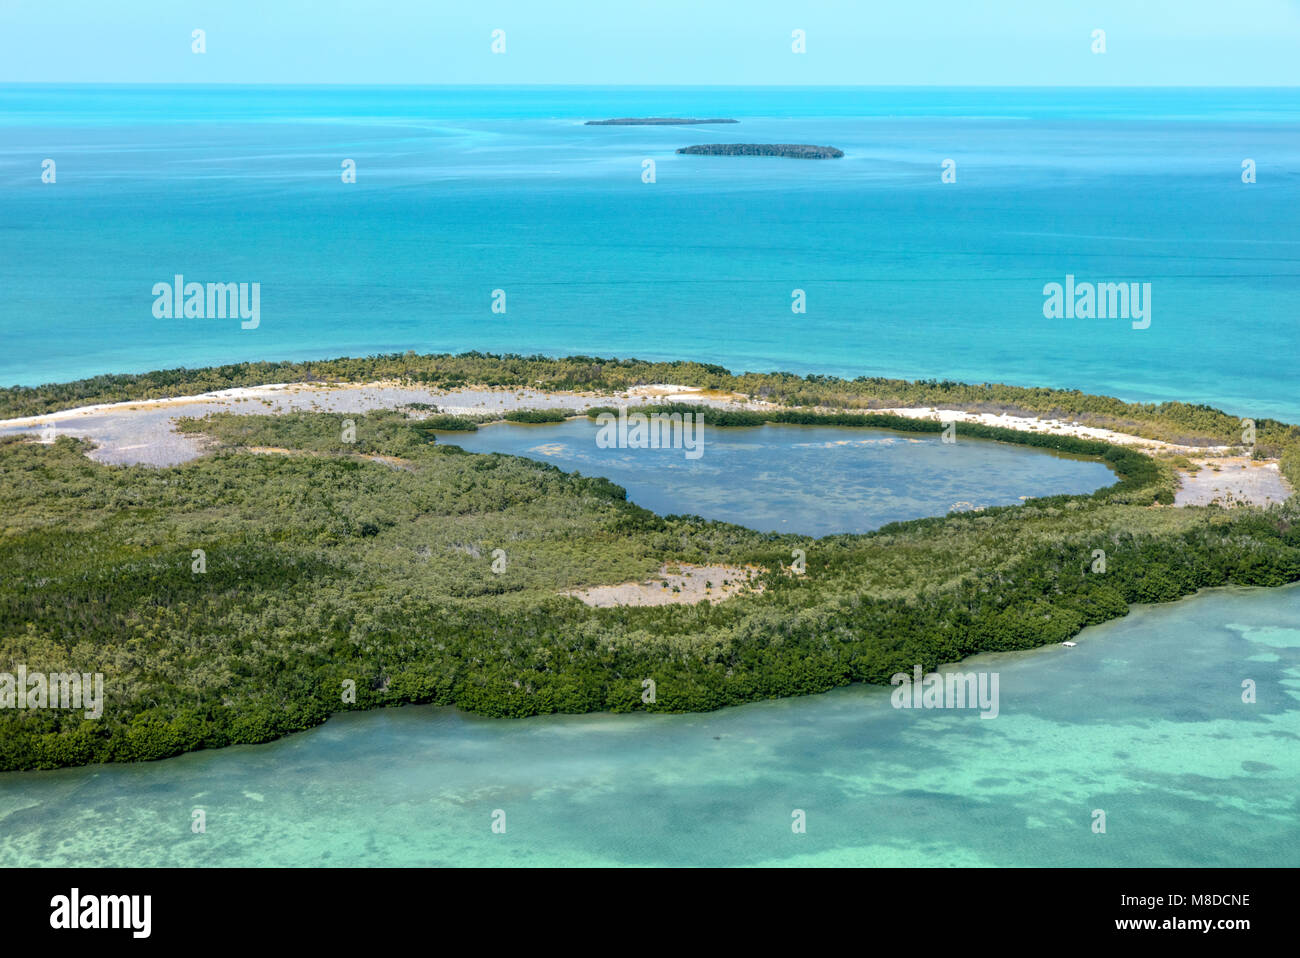 An aerial view of Barracouta Keys, Florida. The islands are located in the proximity of Key West Stock Photo